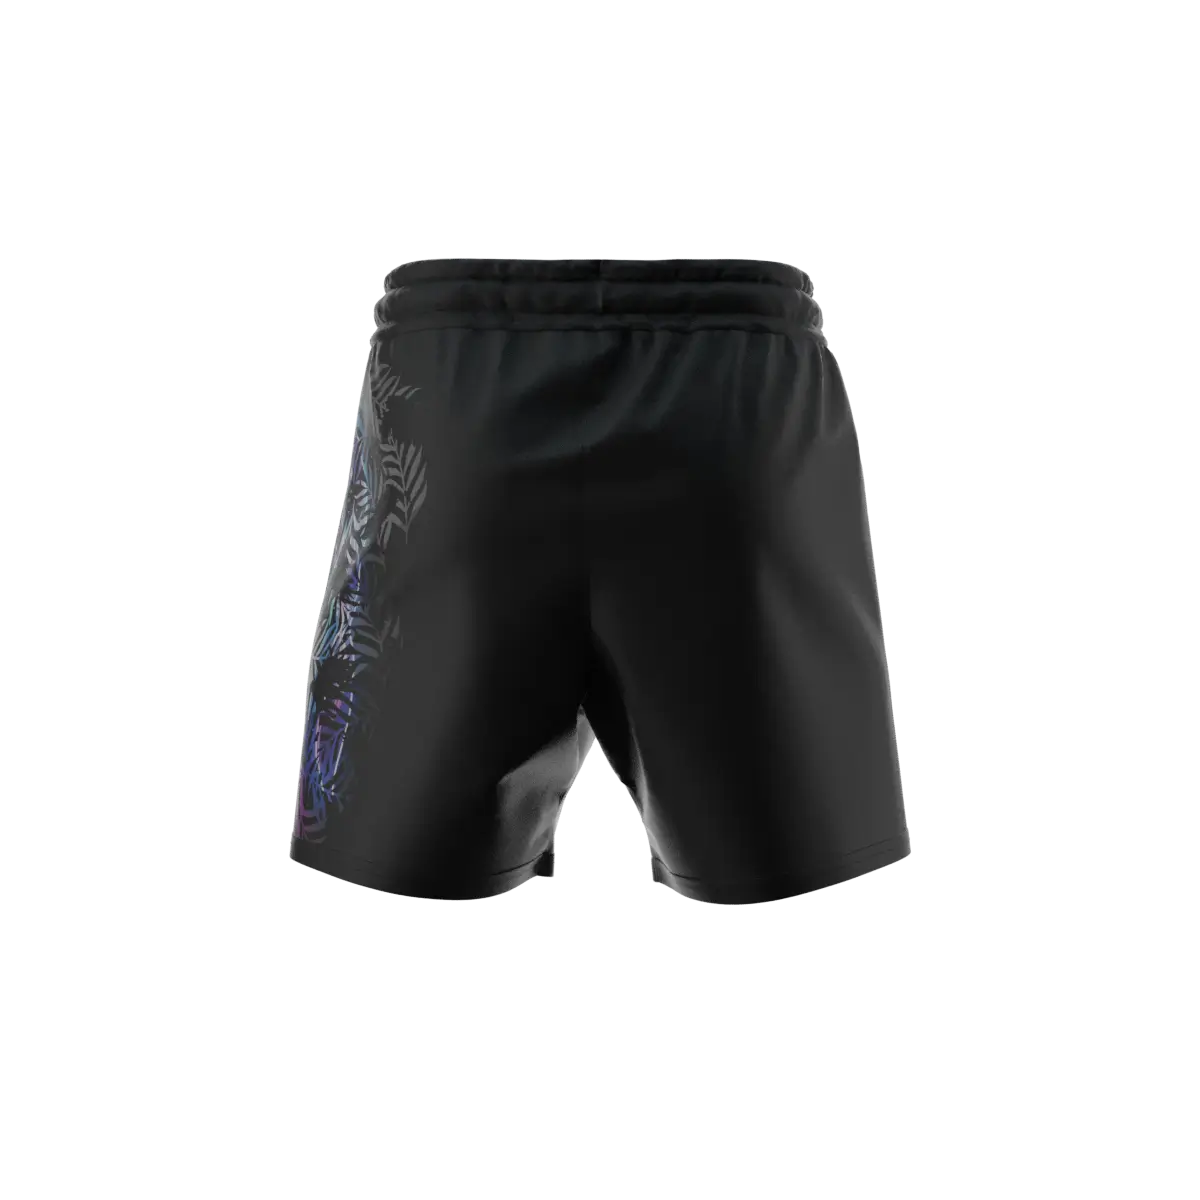 NEON COMP FIGHT SHORTS